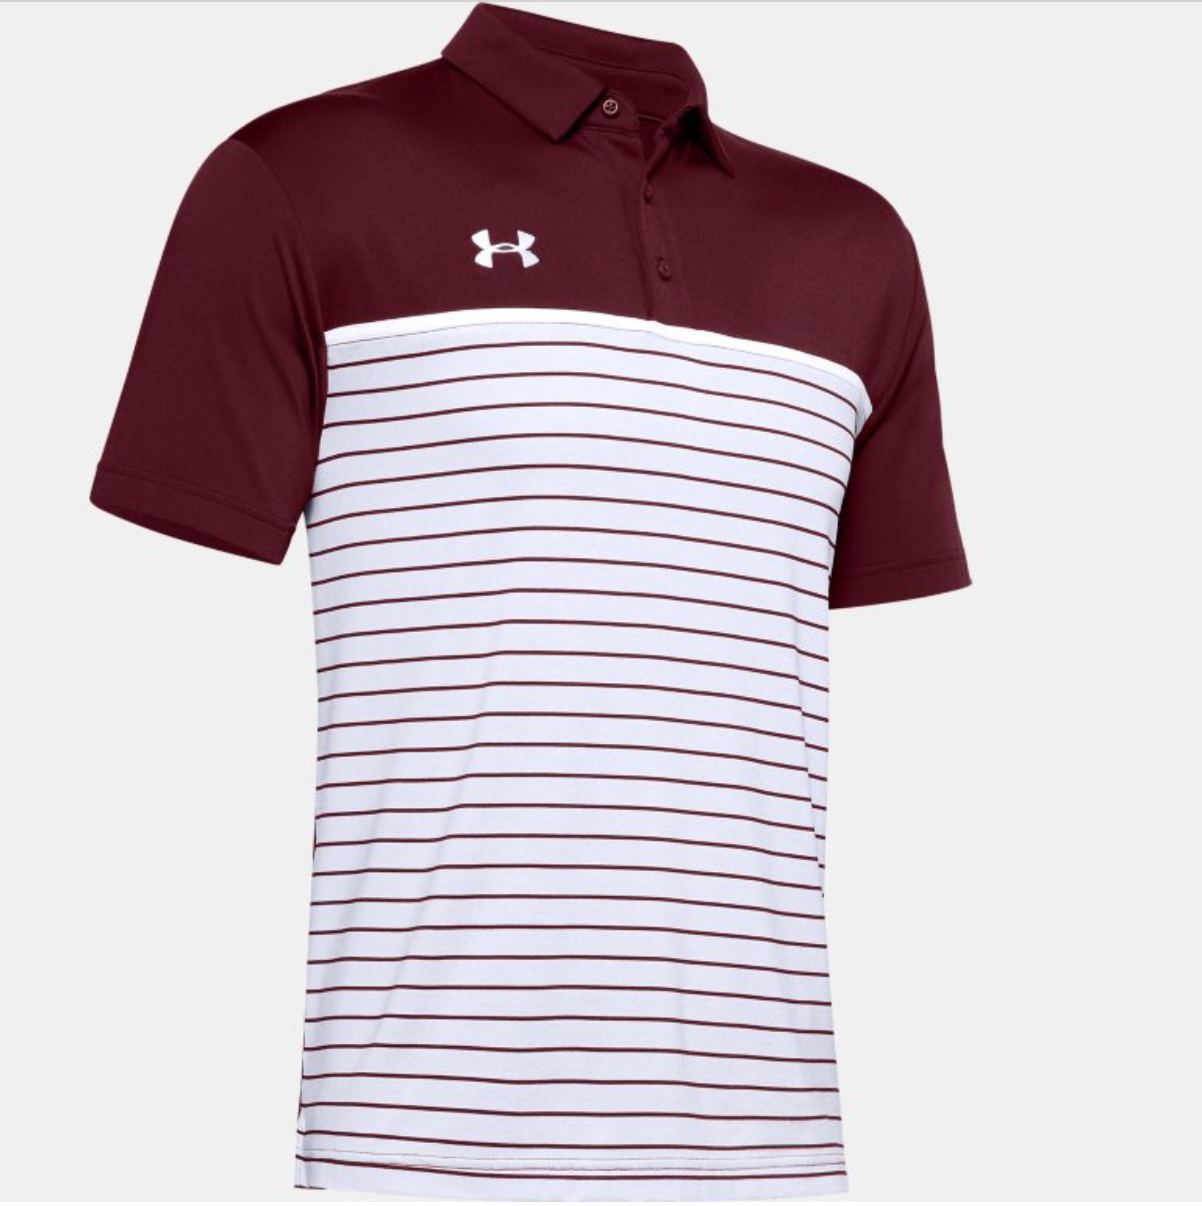 SW High Under Armour Stripe Mix Up Polo Maroon - DK's Hockey Shop